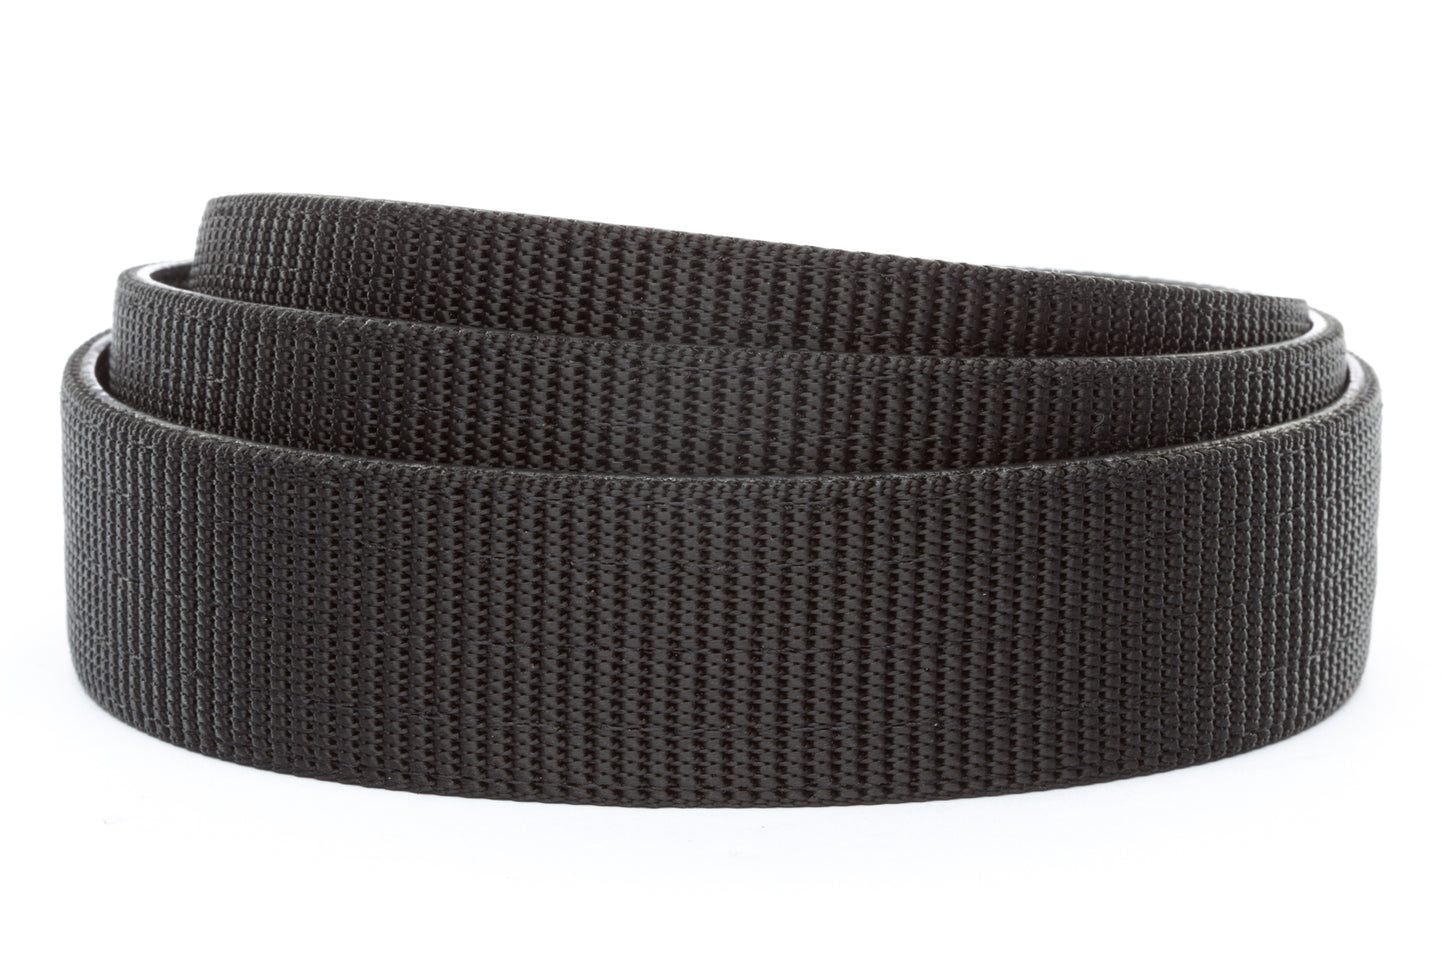 Men's XL nylon belt strap in black, 1.5 inches wide, casual look